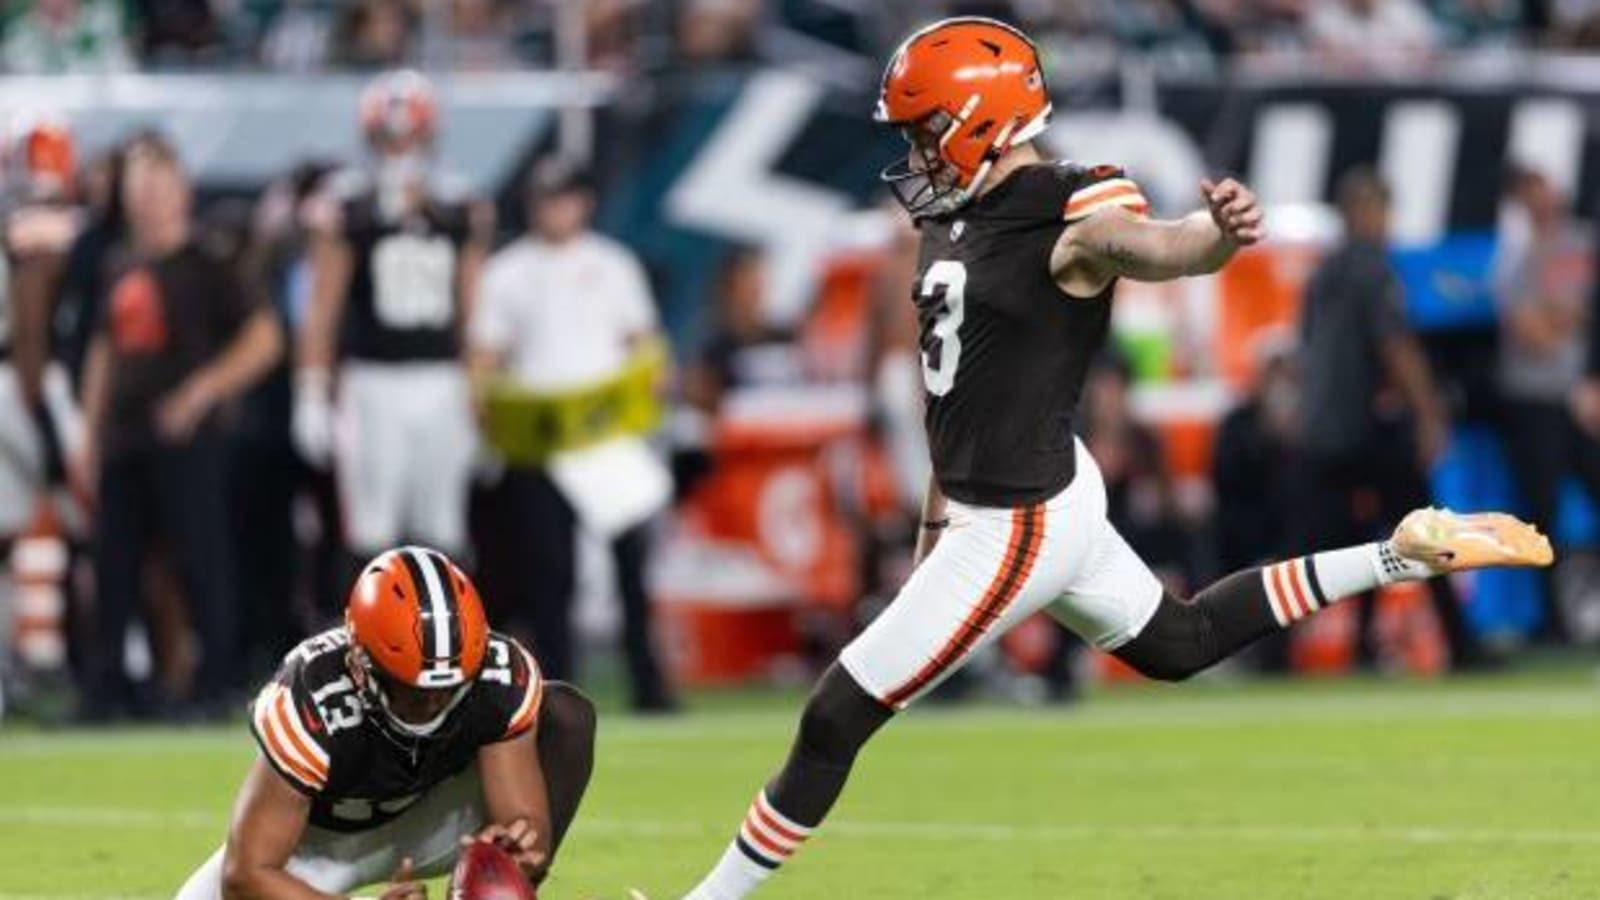 York's kick lifts Browns over Panthers 